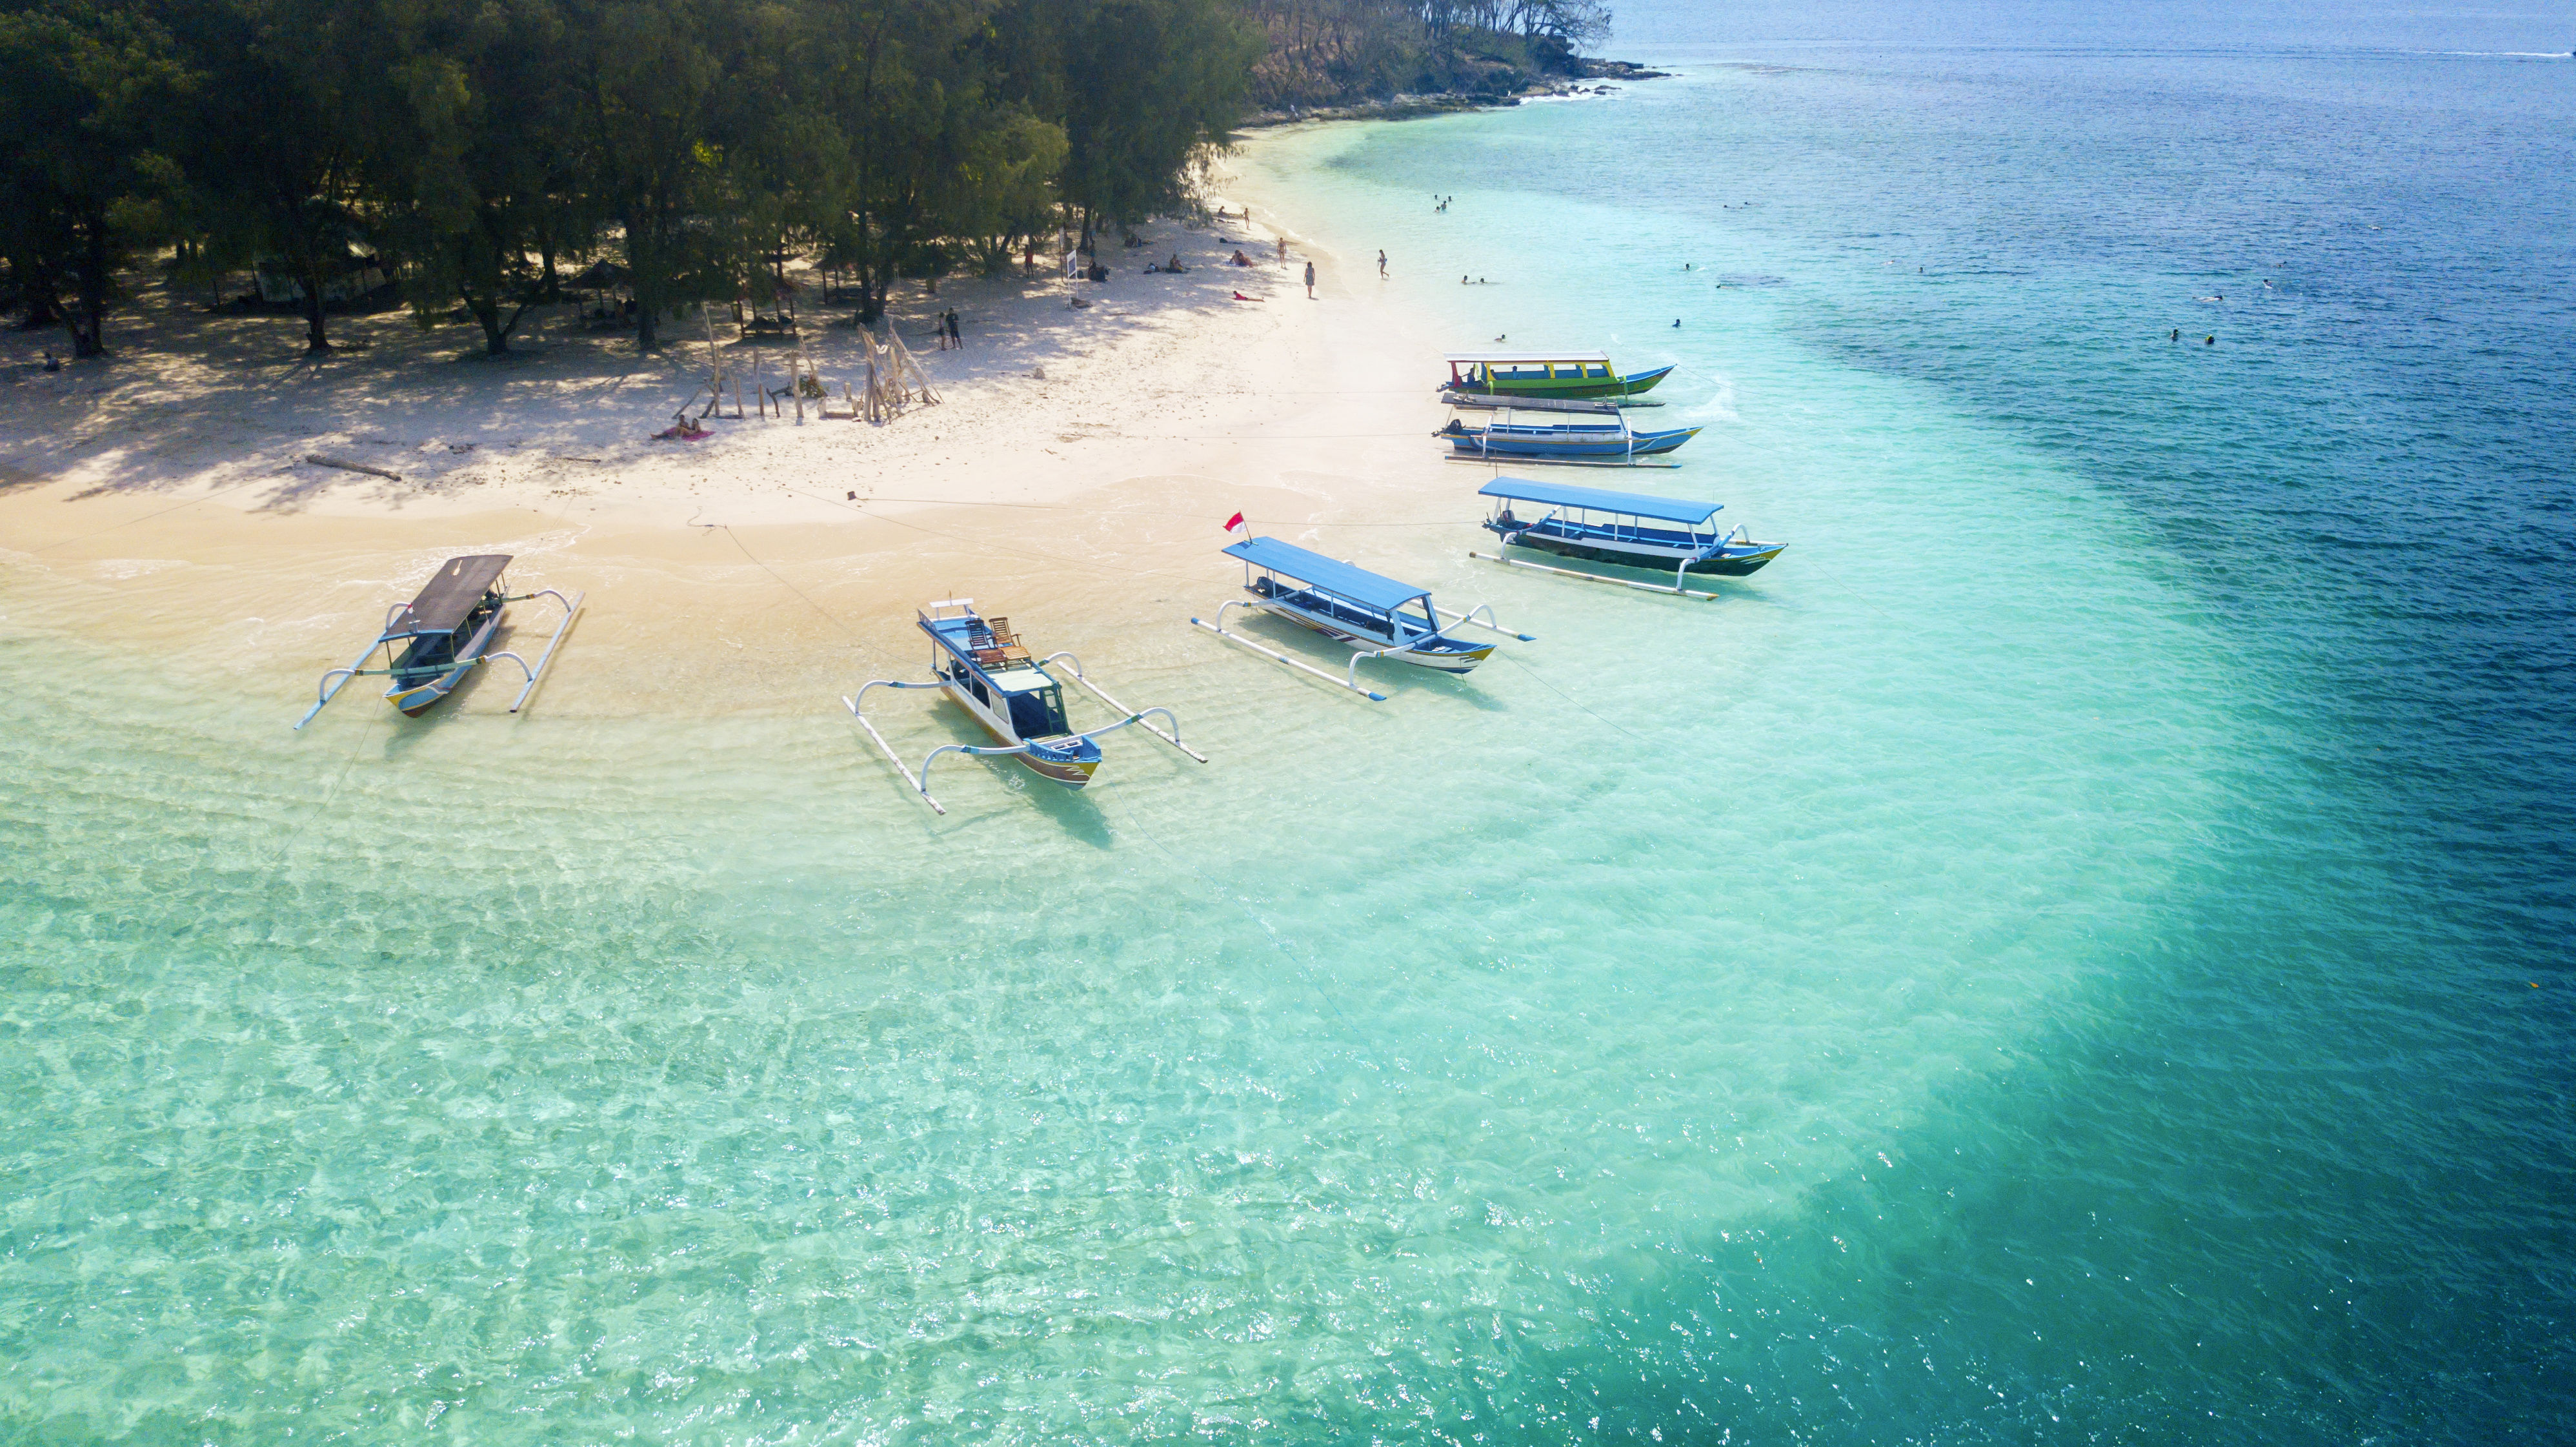 Traditional Indonesian canoe boats (Jukung) mored on tropical turquoise shore with white sand beach at Gili Islands.